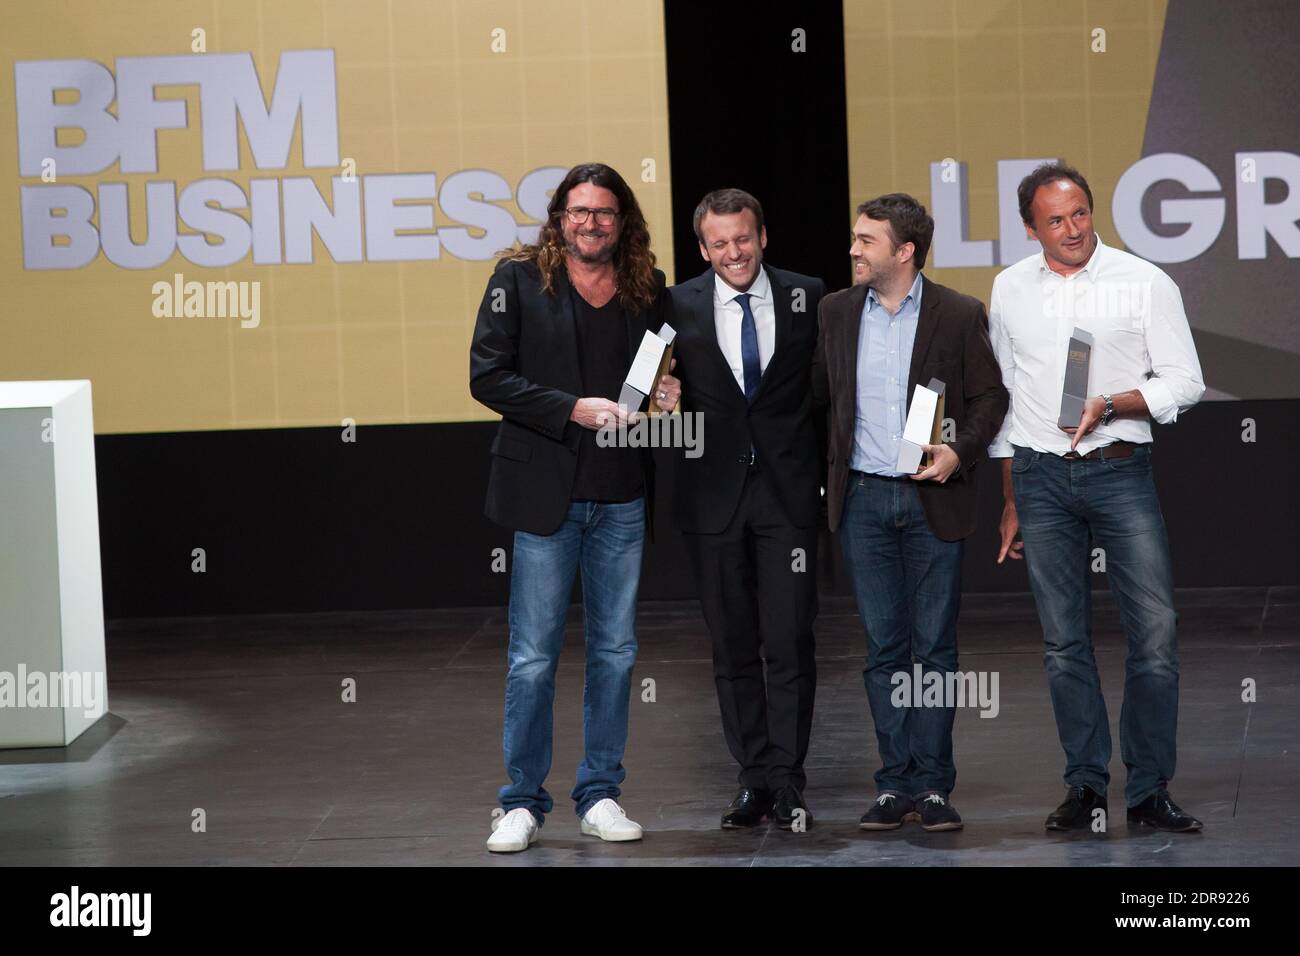 Sigfox CEO Ludovic Le Moan during the BFM Awards 2015 ceremony held at  Theatre des Champs-Elysees in Paris, France on November 2, 2015. Photo by  Christian Liewig/ABACAPRESS.COM Stock Photo - Alamy